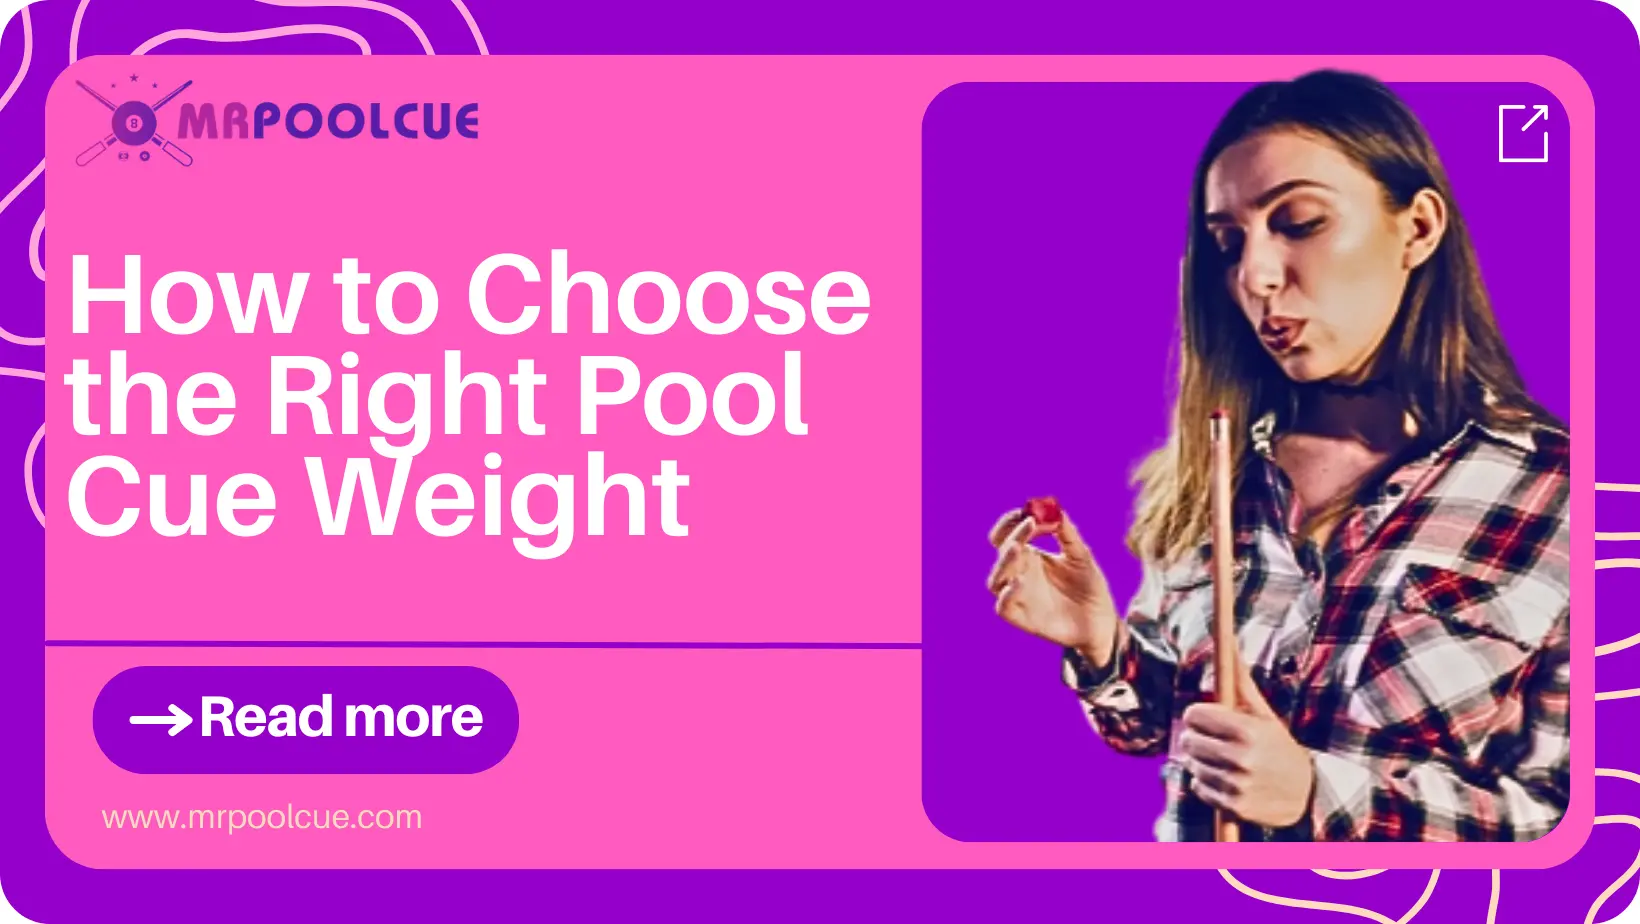 How to Choose the Right Pool Cue Weight